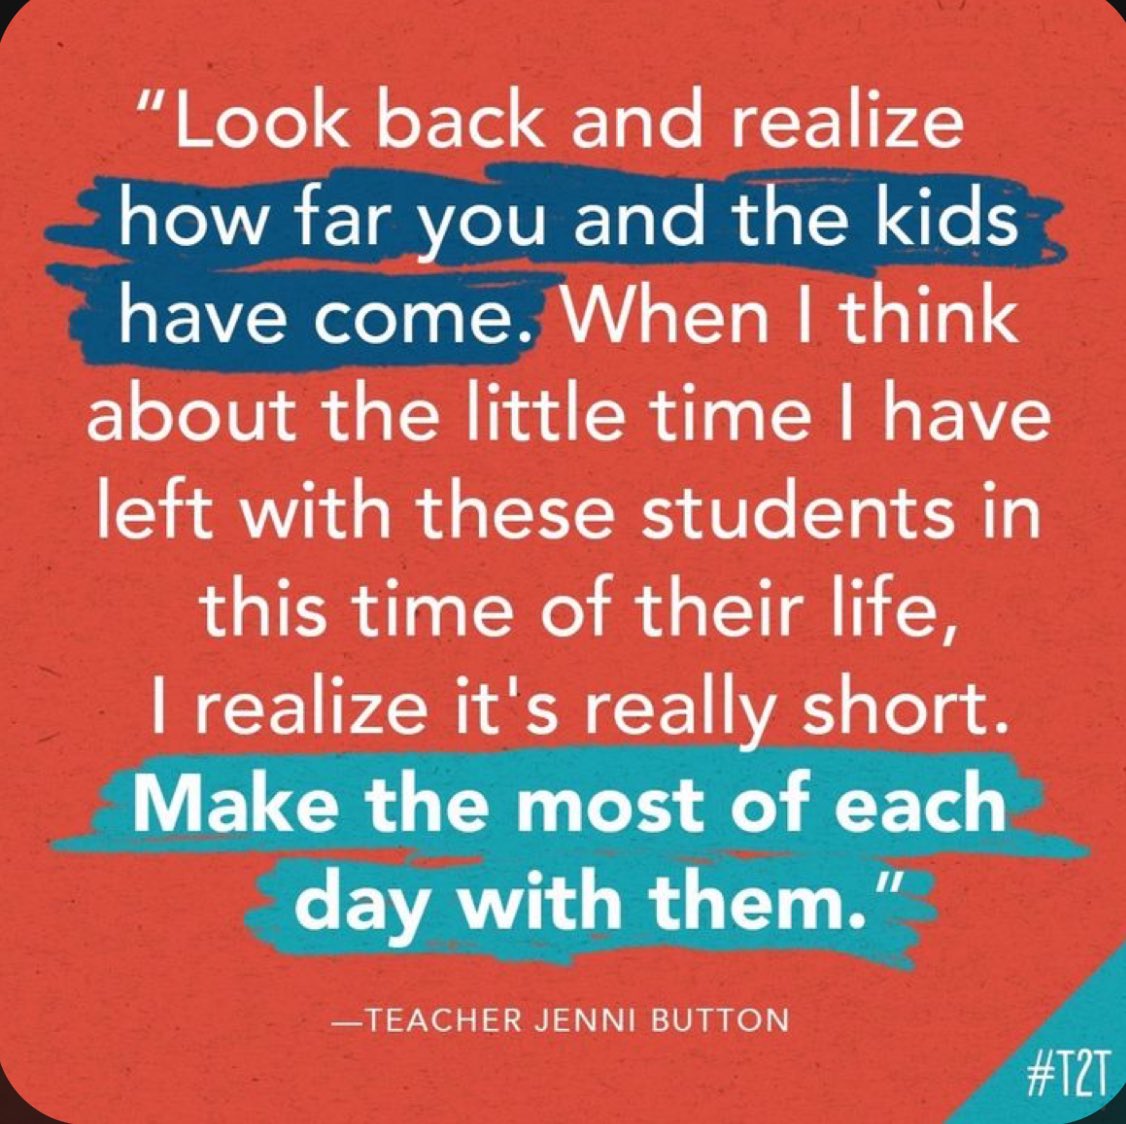 Make the most of the last few weeks of school…you will never have those days again. #educator #leader #time